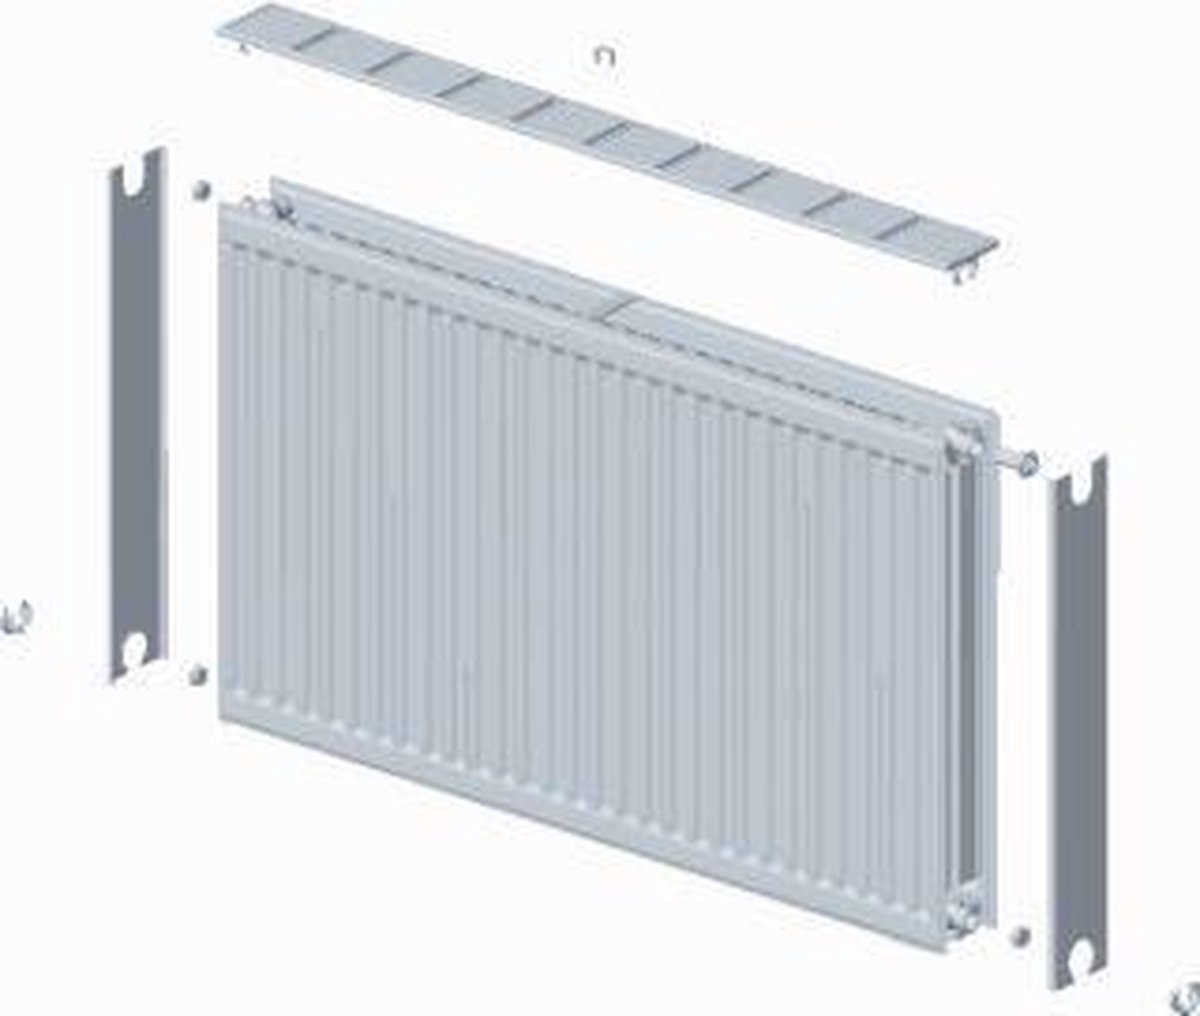 Stelrad paneelradiator Novello, staal, wit, (hxlxd) 900x1200x100mm, 22